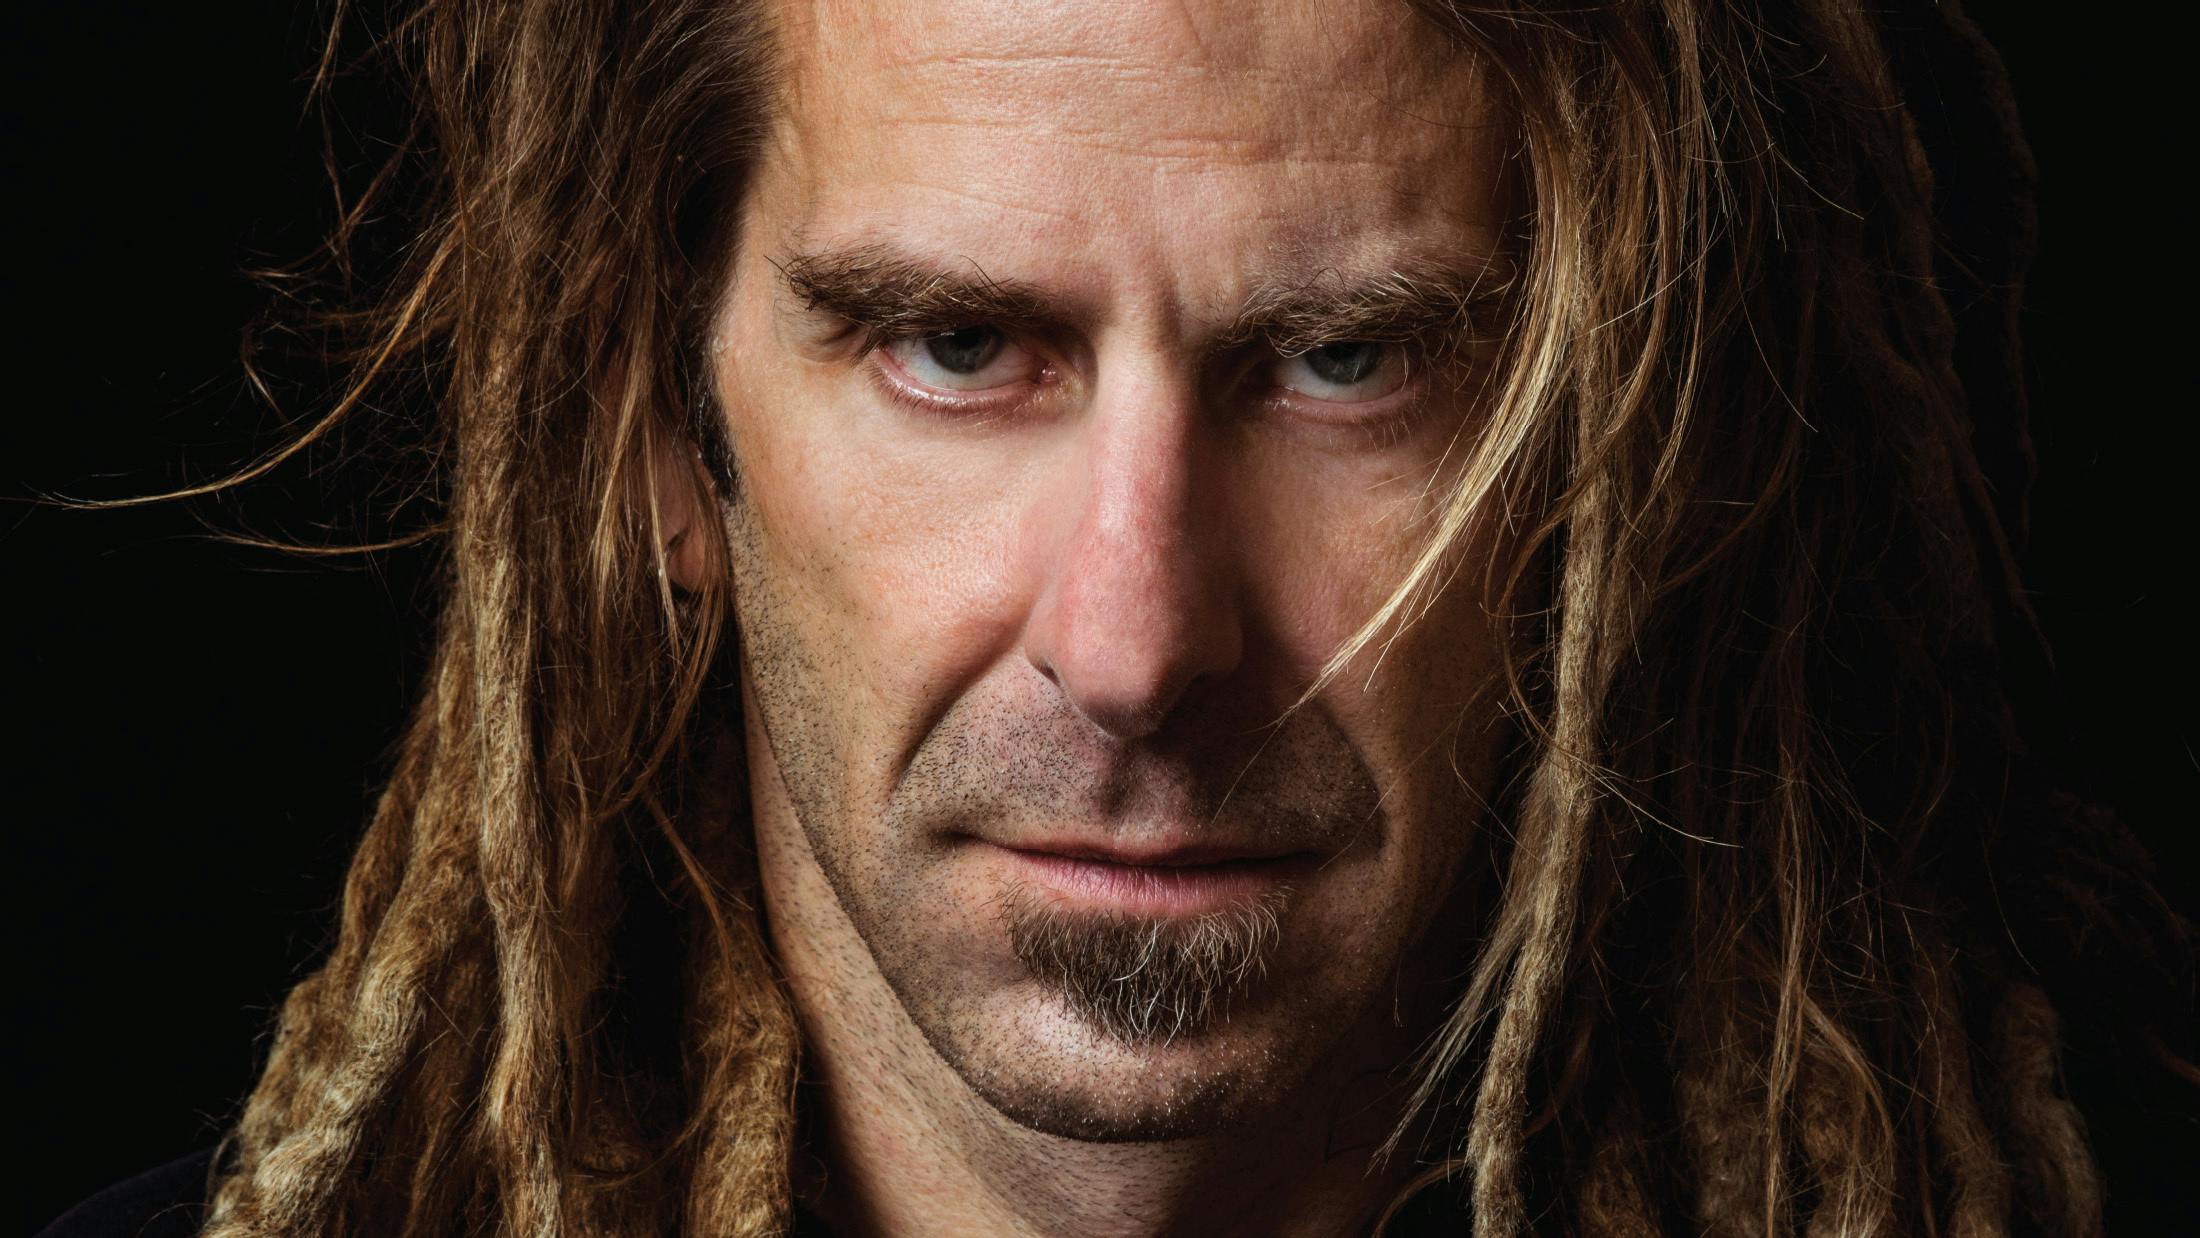 Randy Blythe: “In an ideal world, I’d have made millions, retired to a hilltop mansion and be surrounded by models by now”